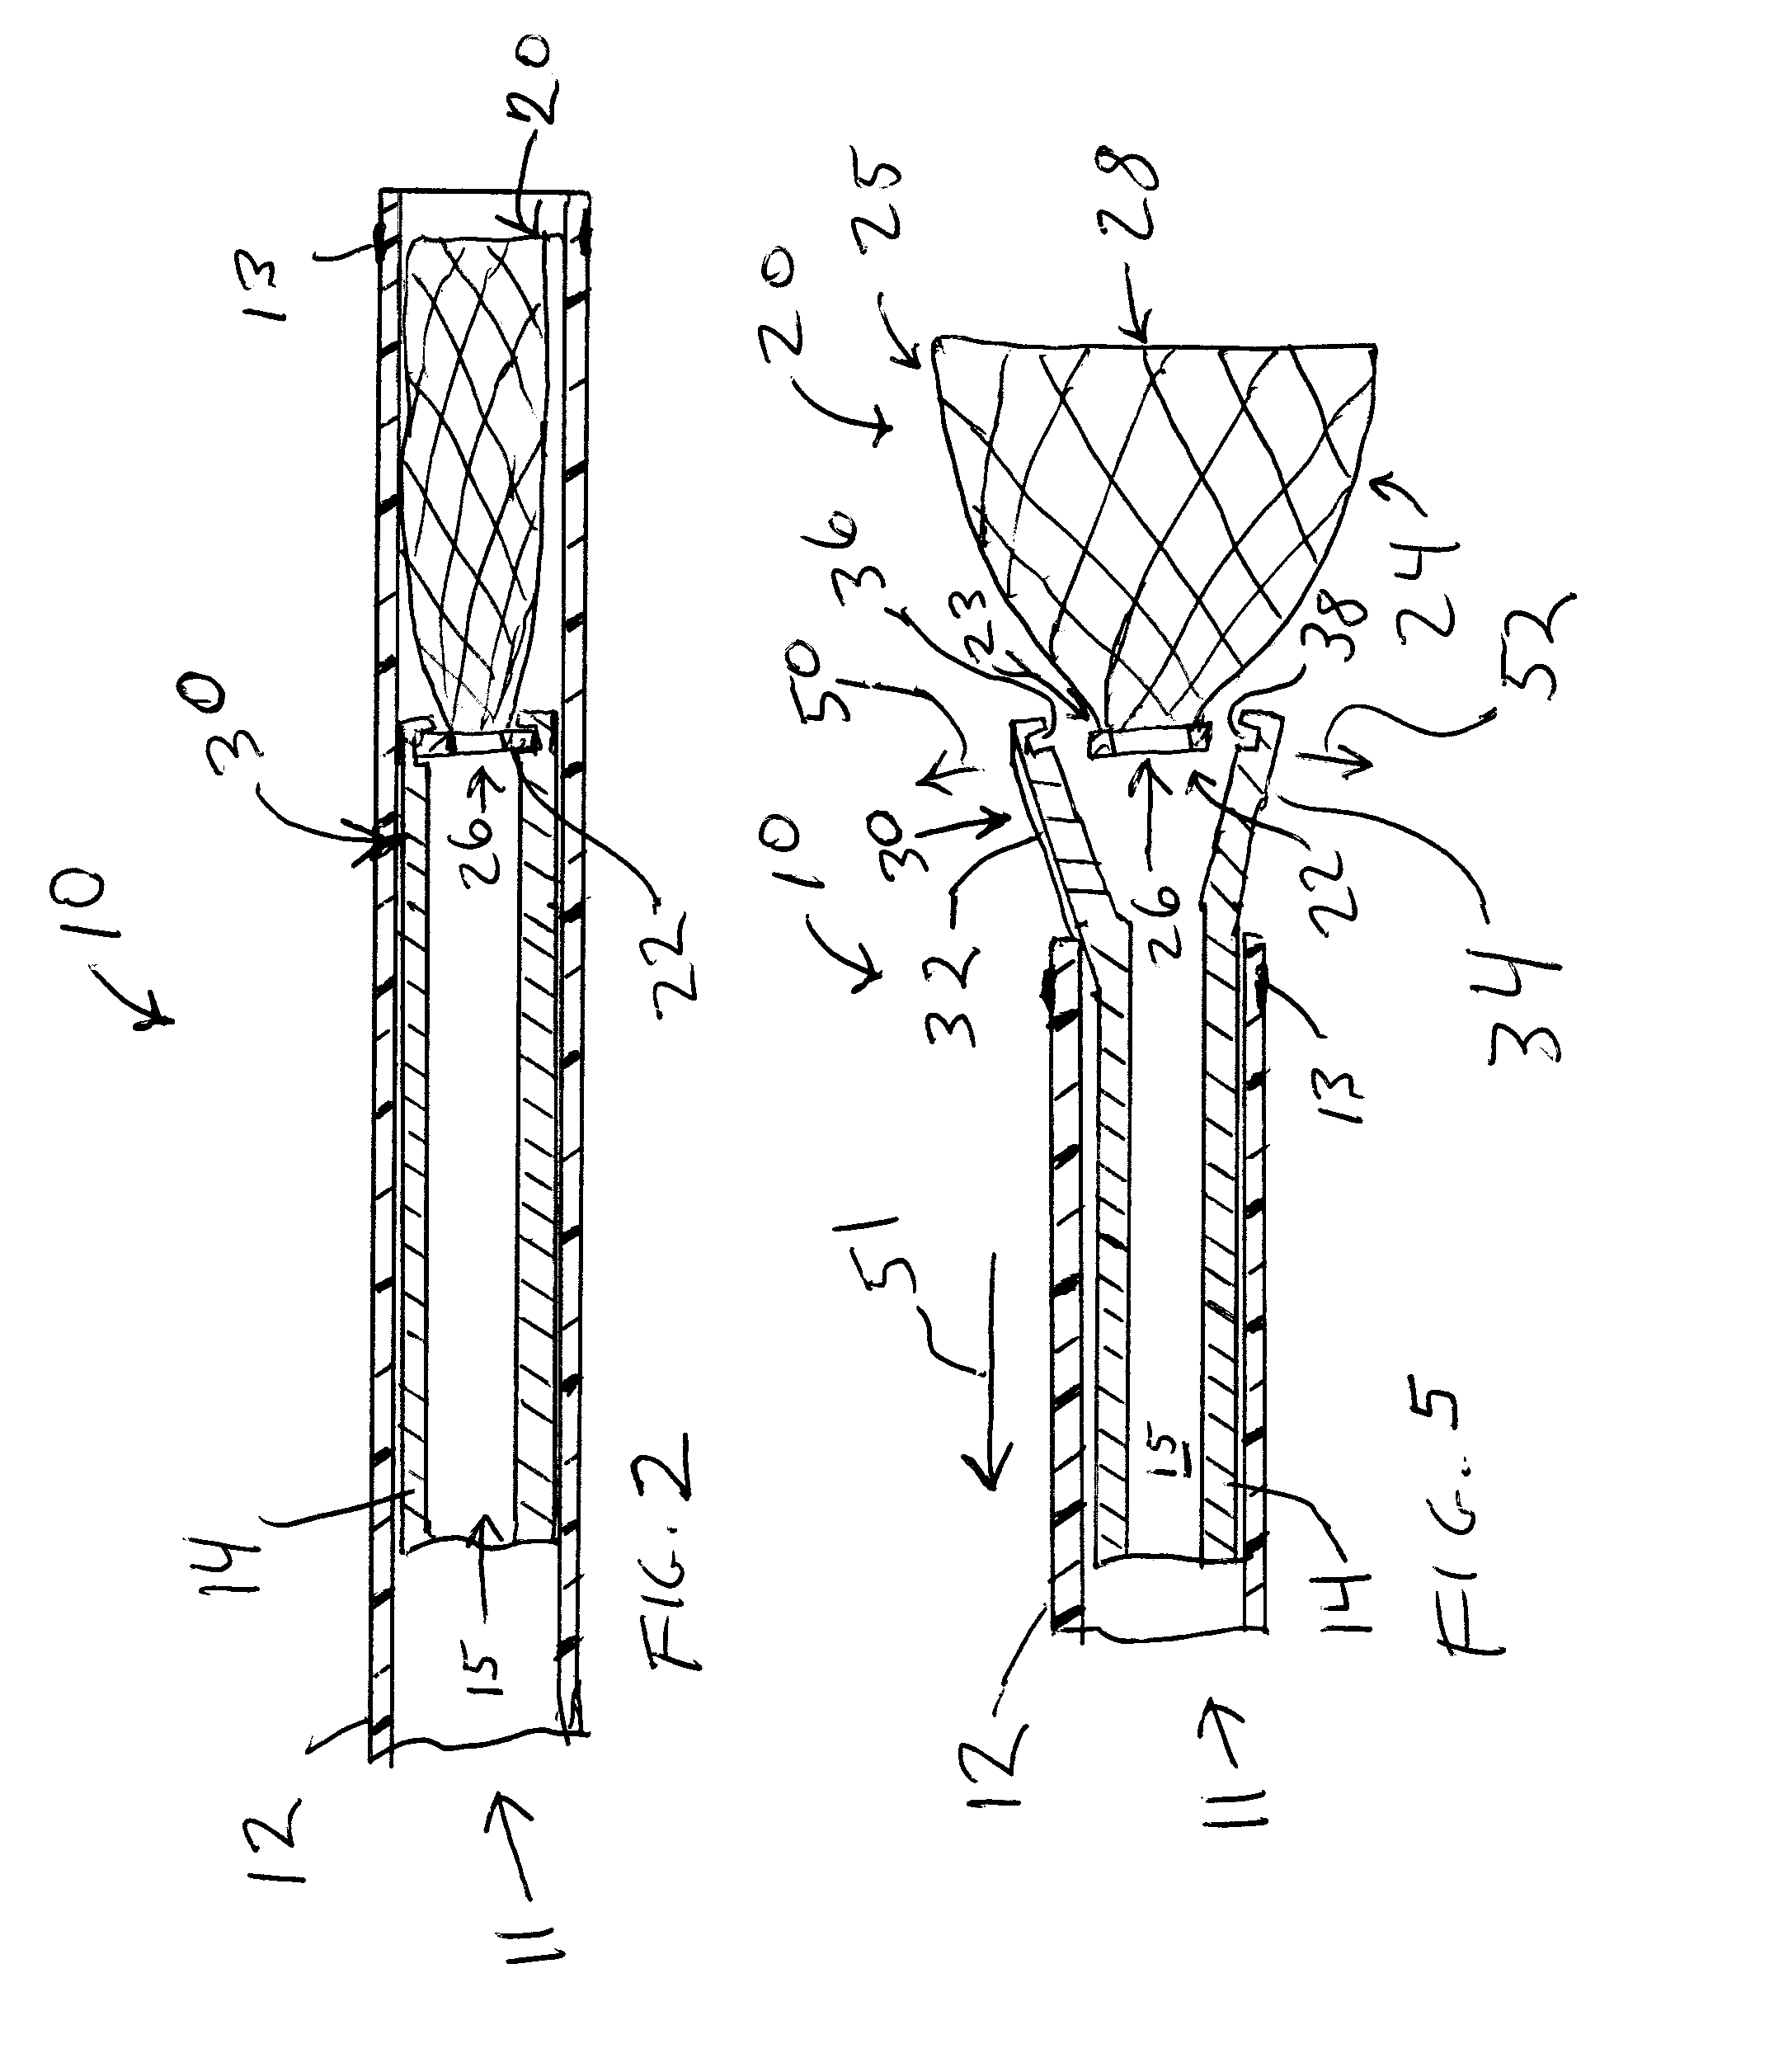 Aneurysm occlusion device